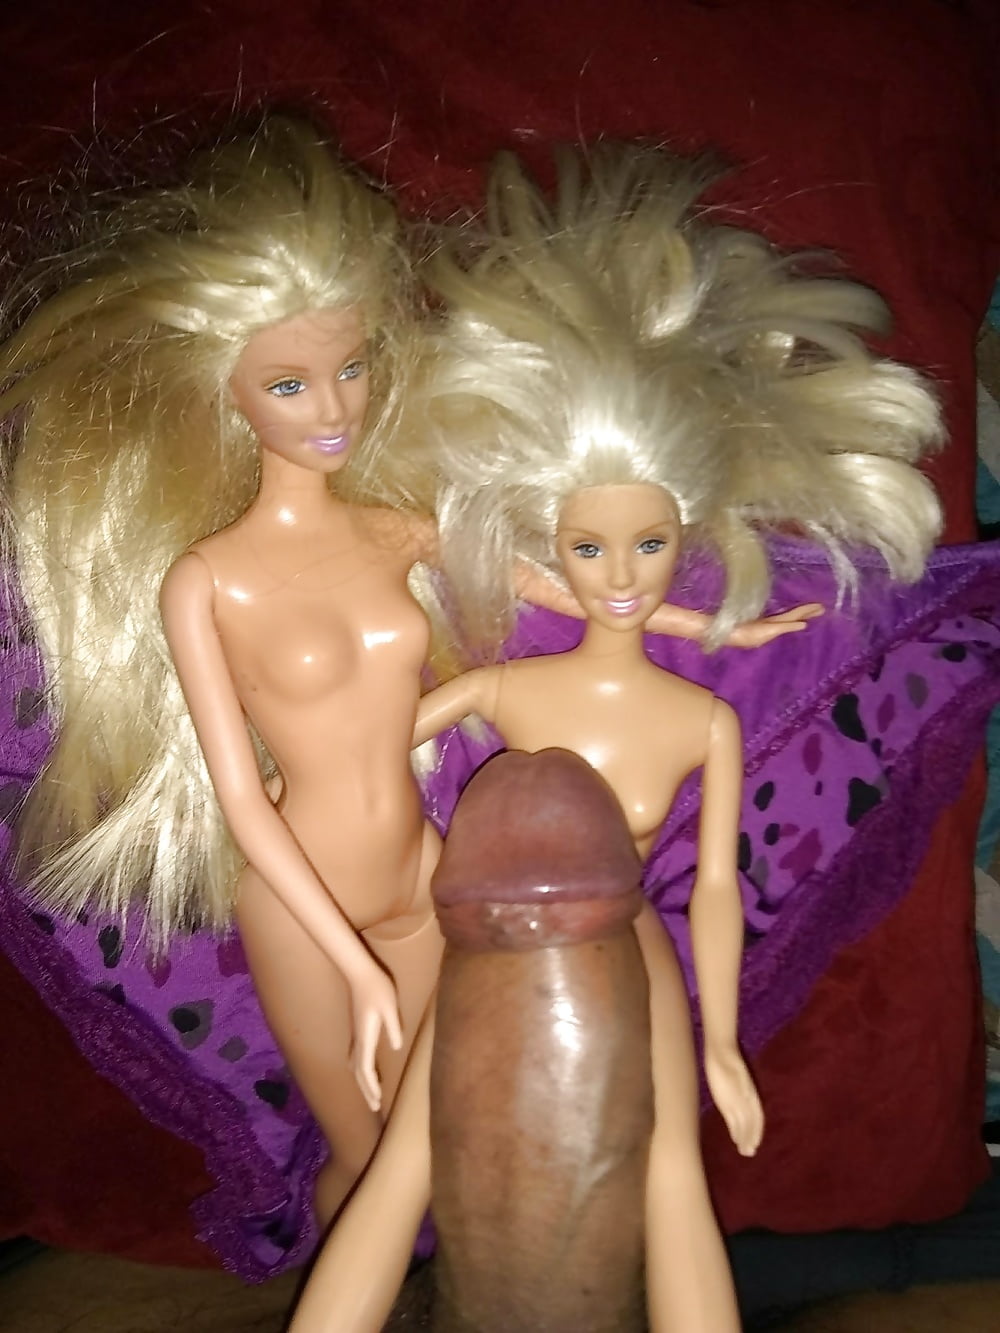 Women sexing with men naked barbie.